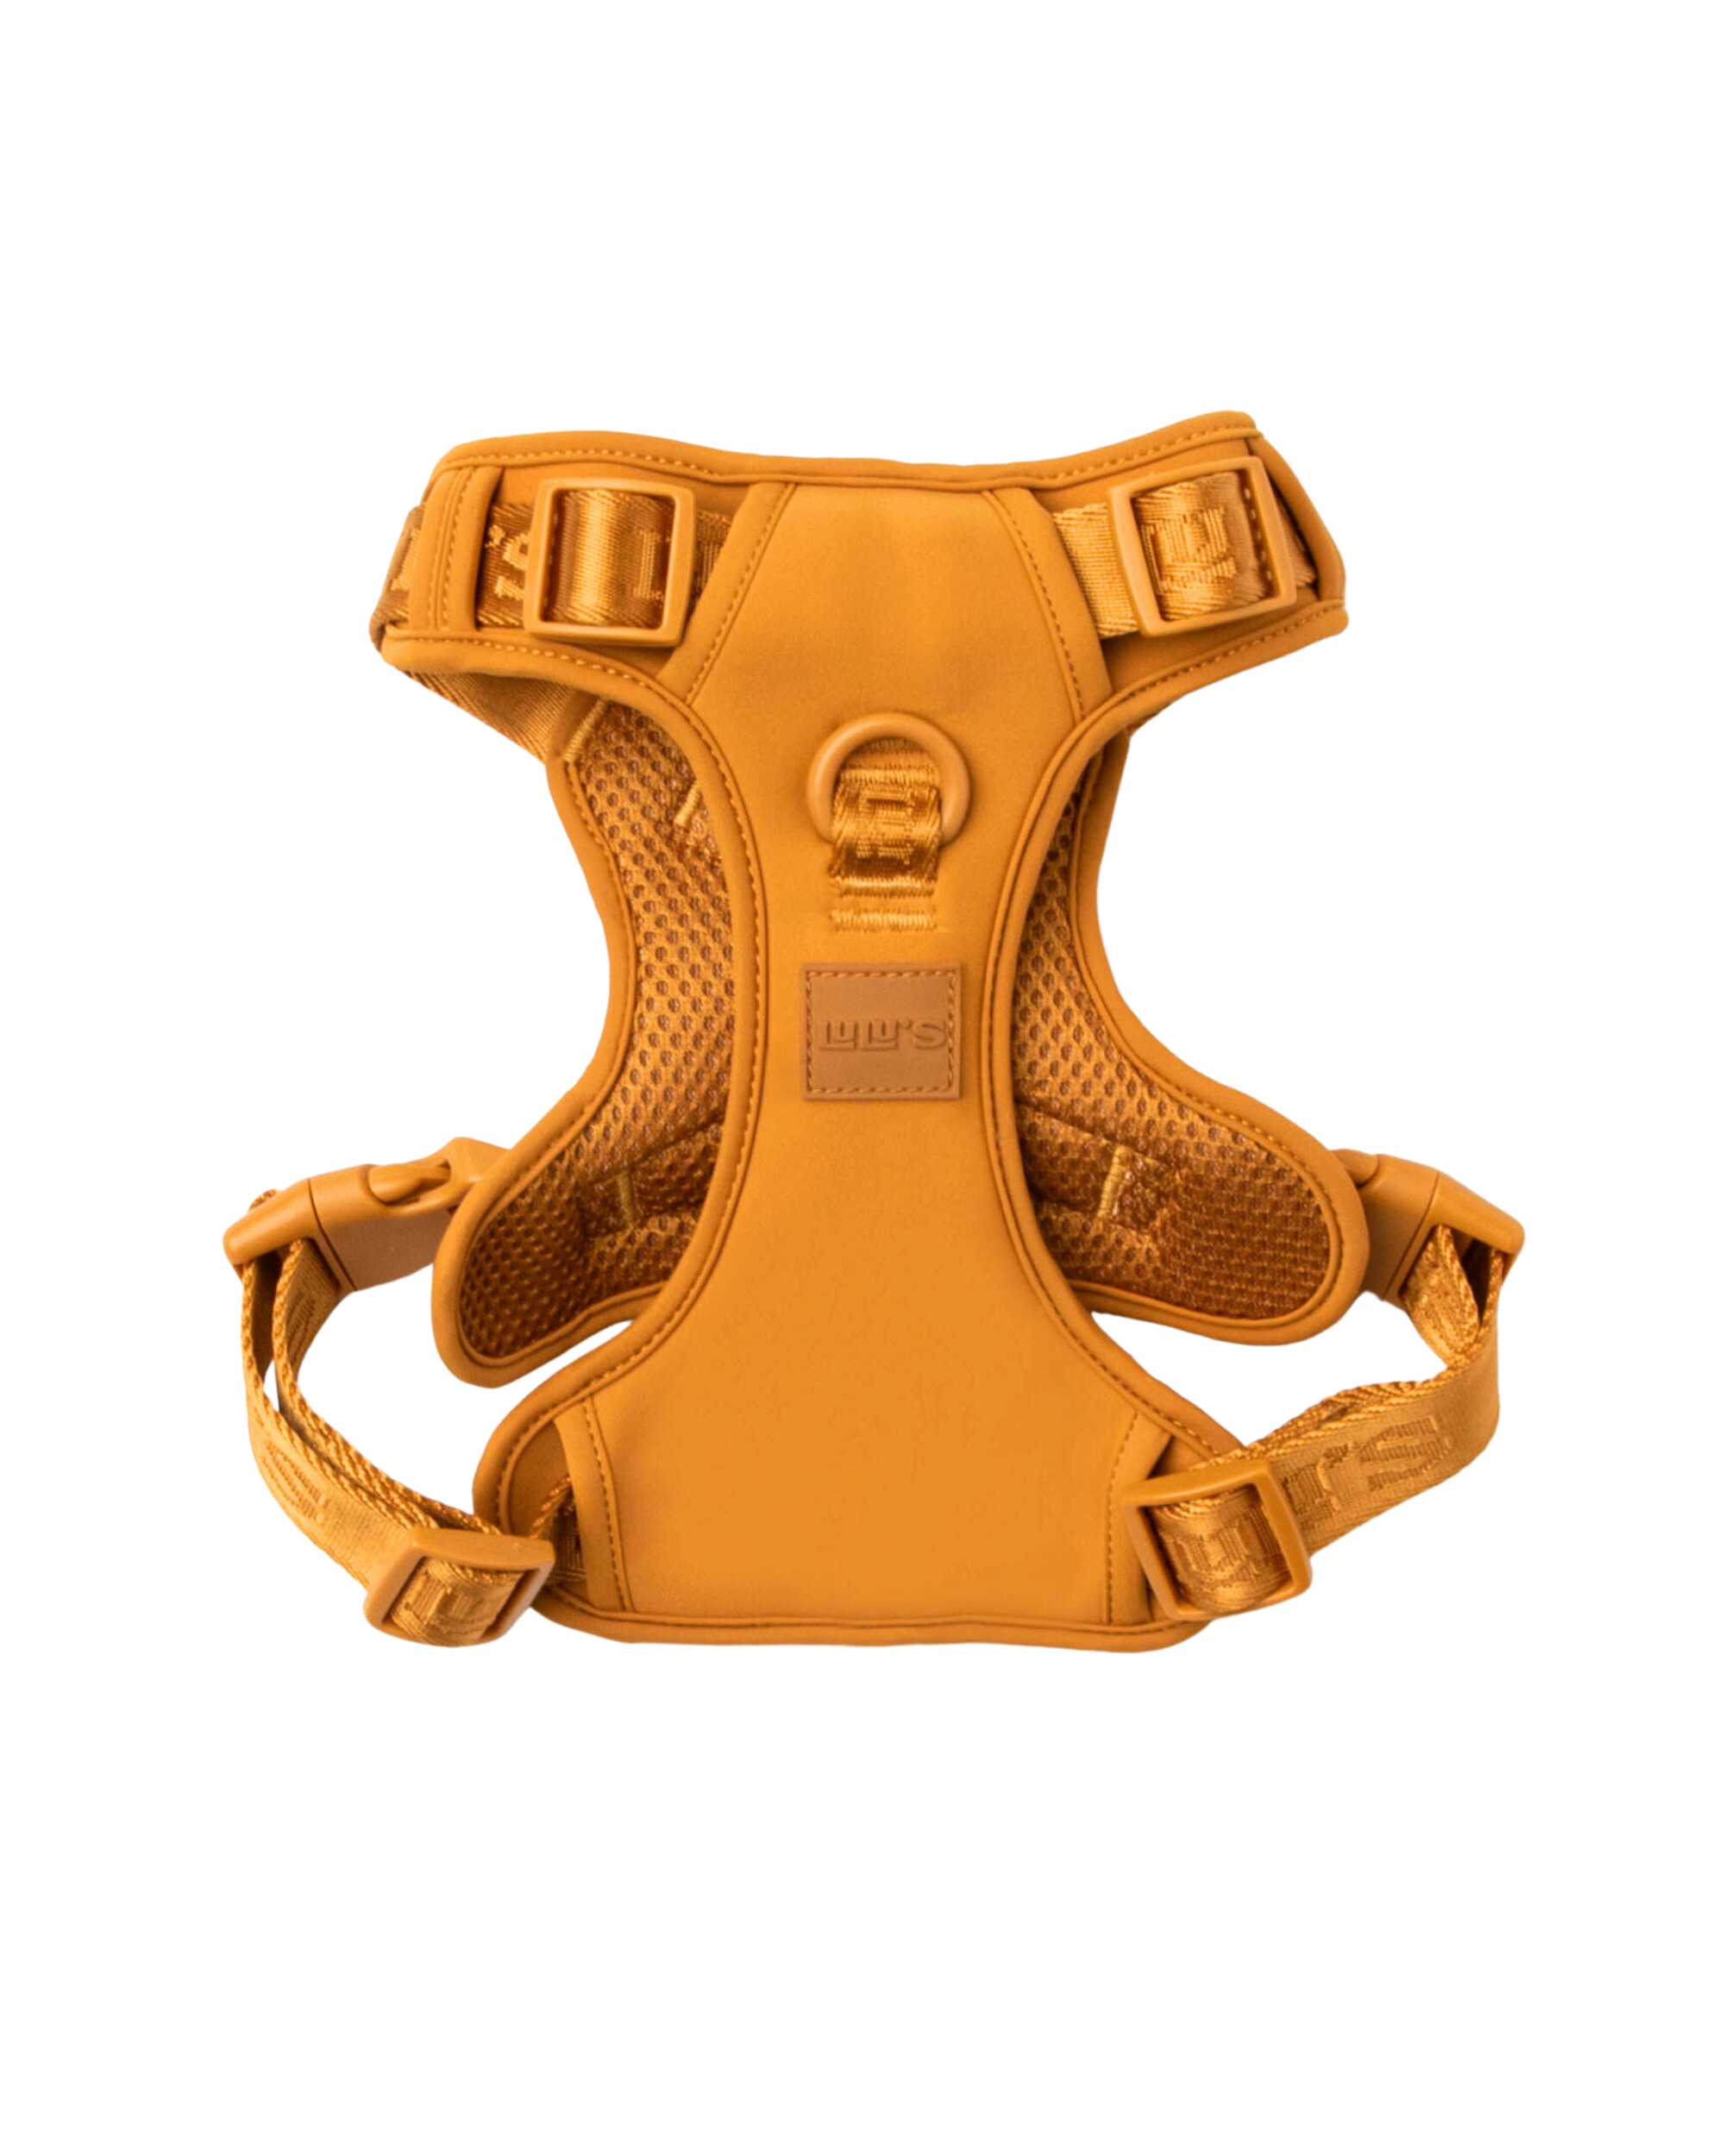 Back view of Sand orange dog harness with mesh padding and adjustable straps, featuring sturdy buckles and a D-ring for leash attachment.